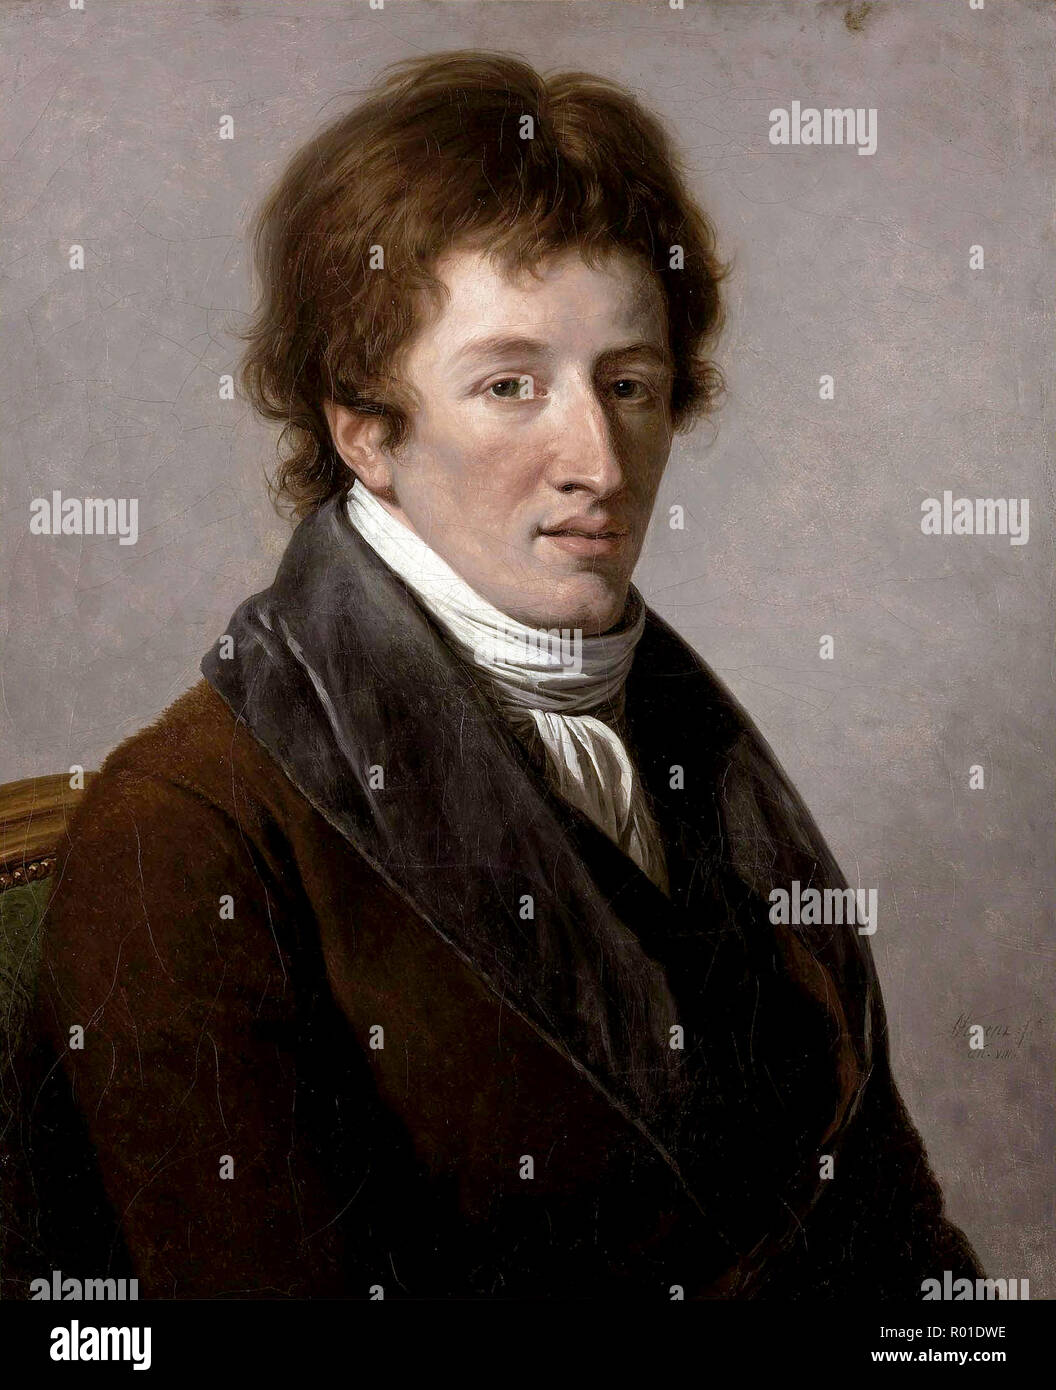 Baron Georges Cuvier (1769 - 1832) Jean Léopold Nicolas Frédéric, Baron Cuvier, known as Georges Cuvier, French naturalist and zoologist, sometimes referred to as the 'founding father of paleontology' Stock Photo